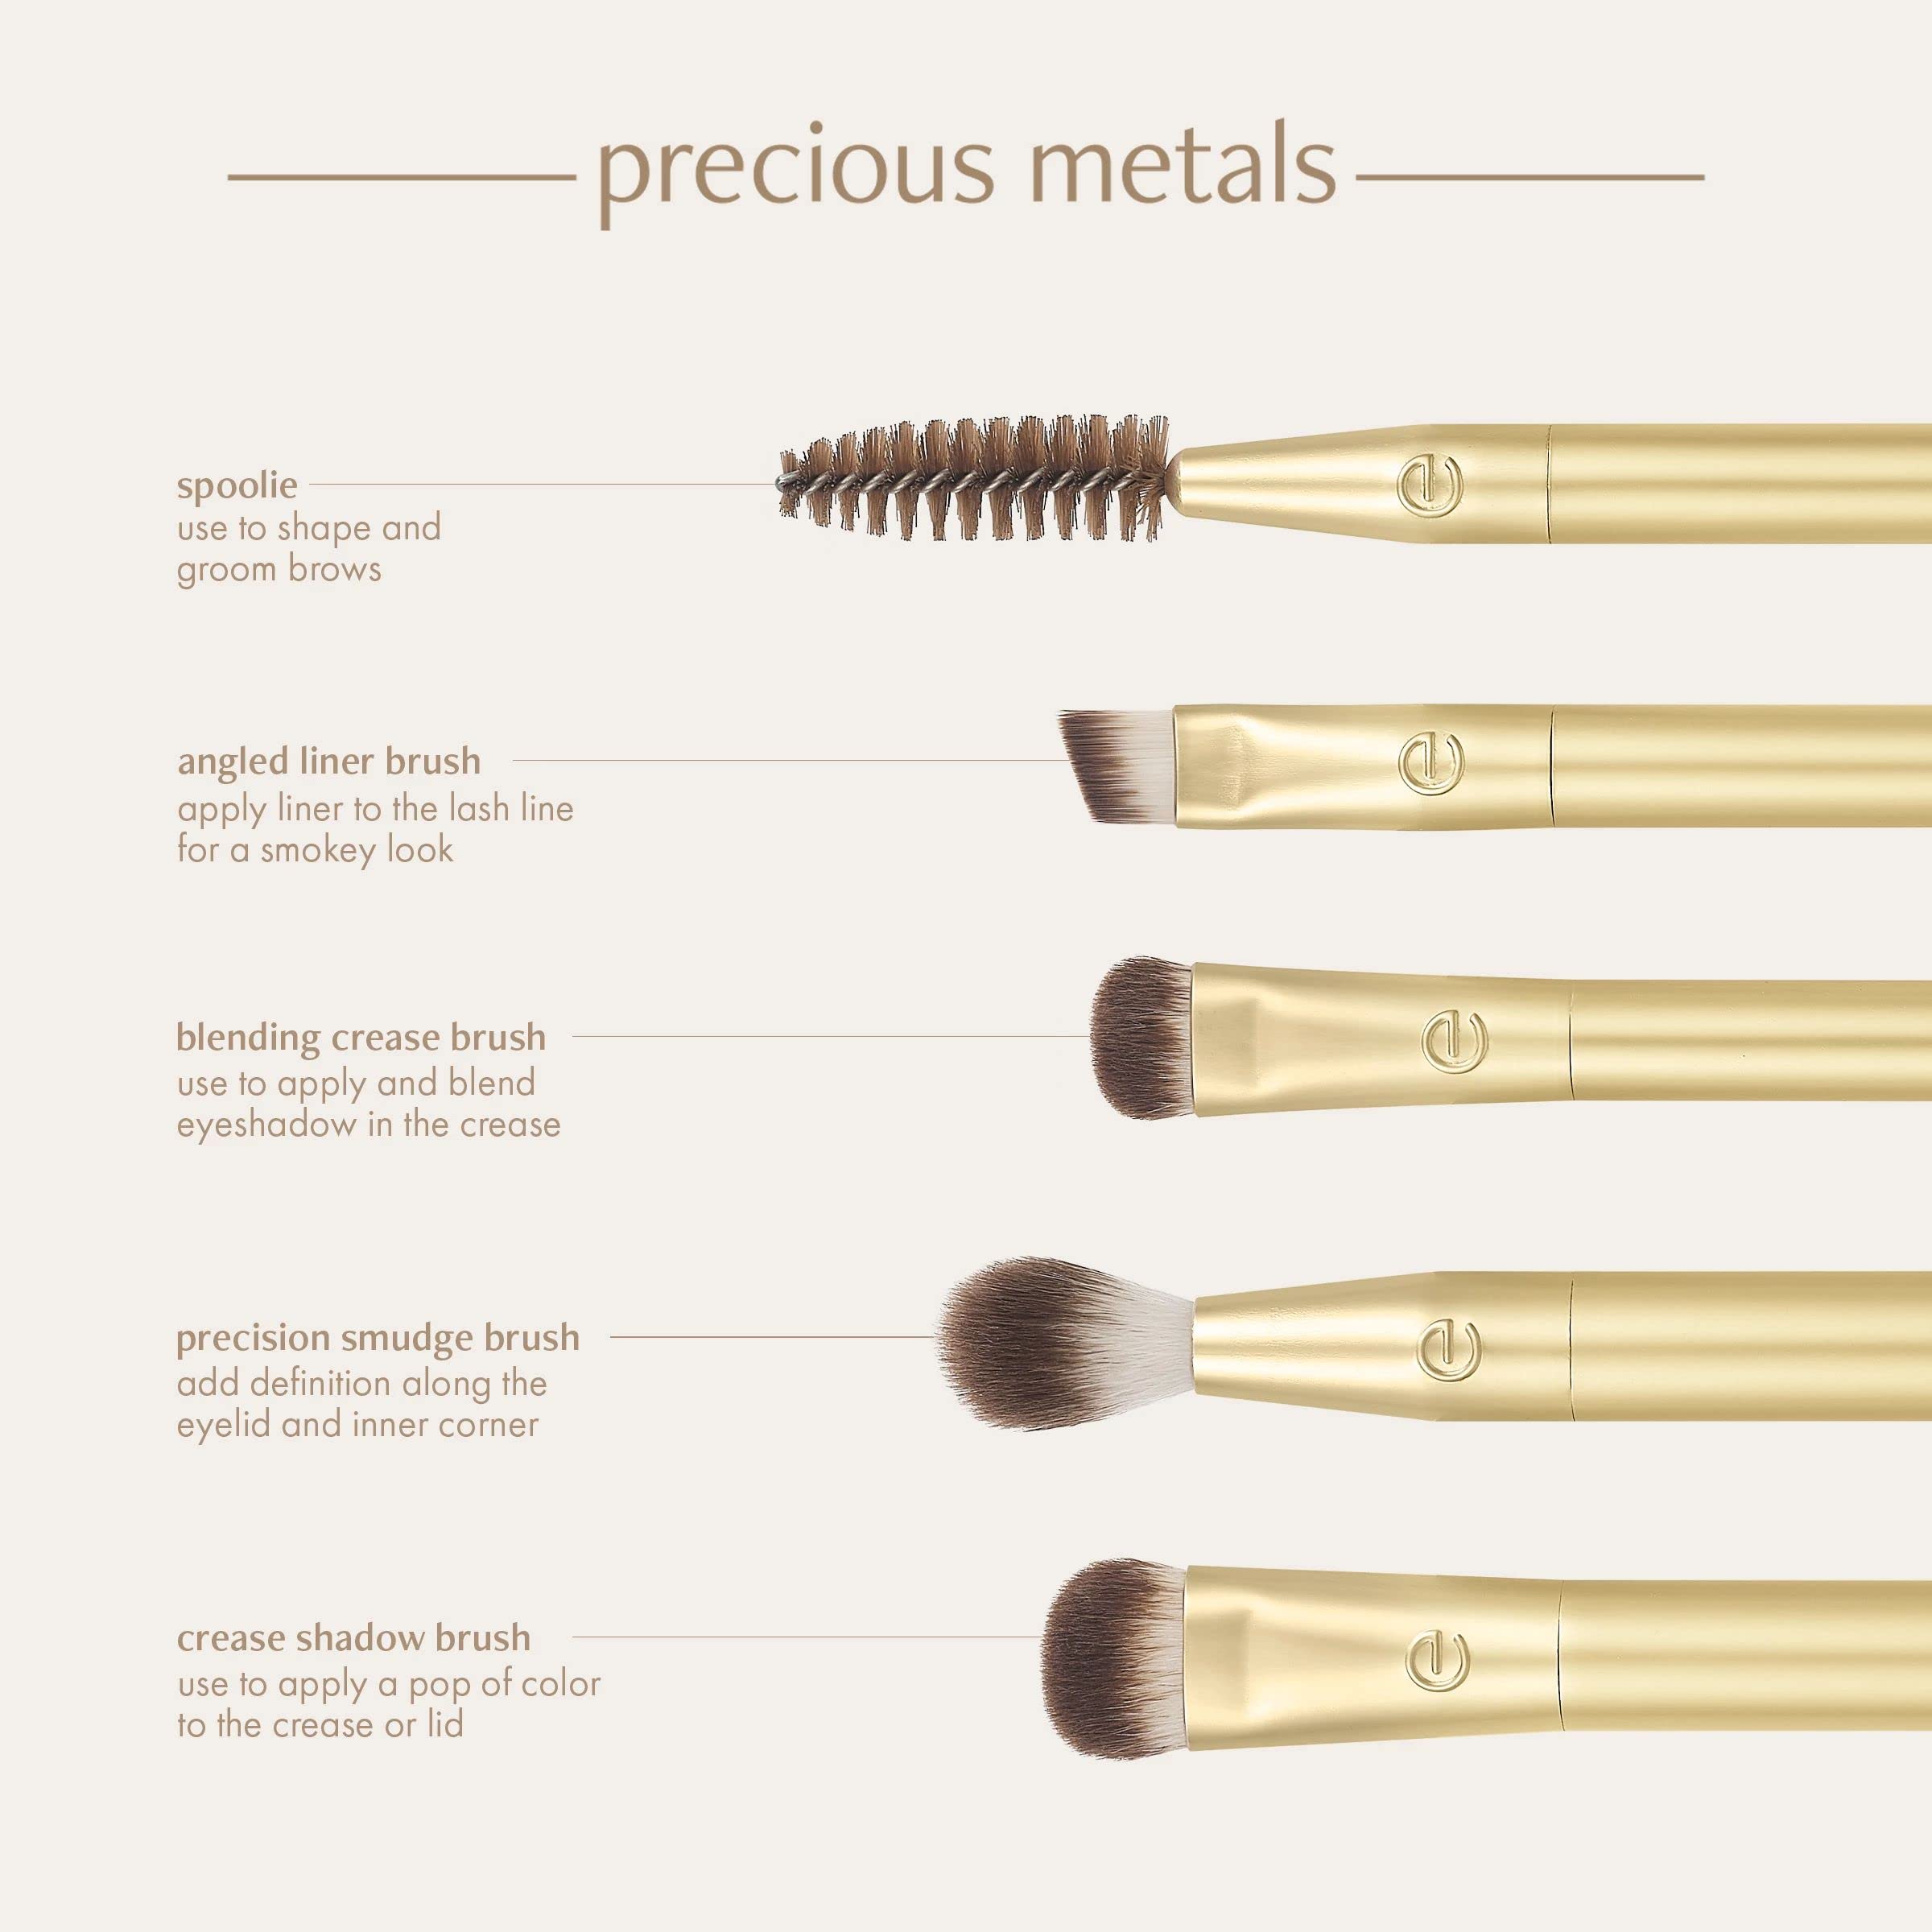 EcoTools Precious Metals Brightening Eye Kit, Precision Makeup Brushes For Eyeshadow, Brows, & Liner, Eco-friendly Makeup Brush Set, Sustainable Recycled Aluminum, Cruelty-Free, Chrome, 5 Piece Set